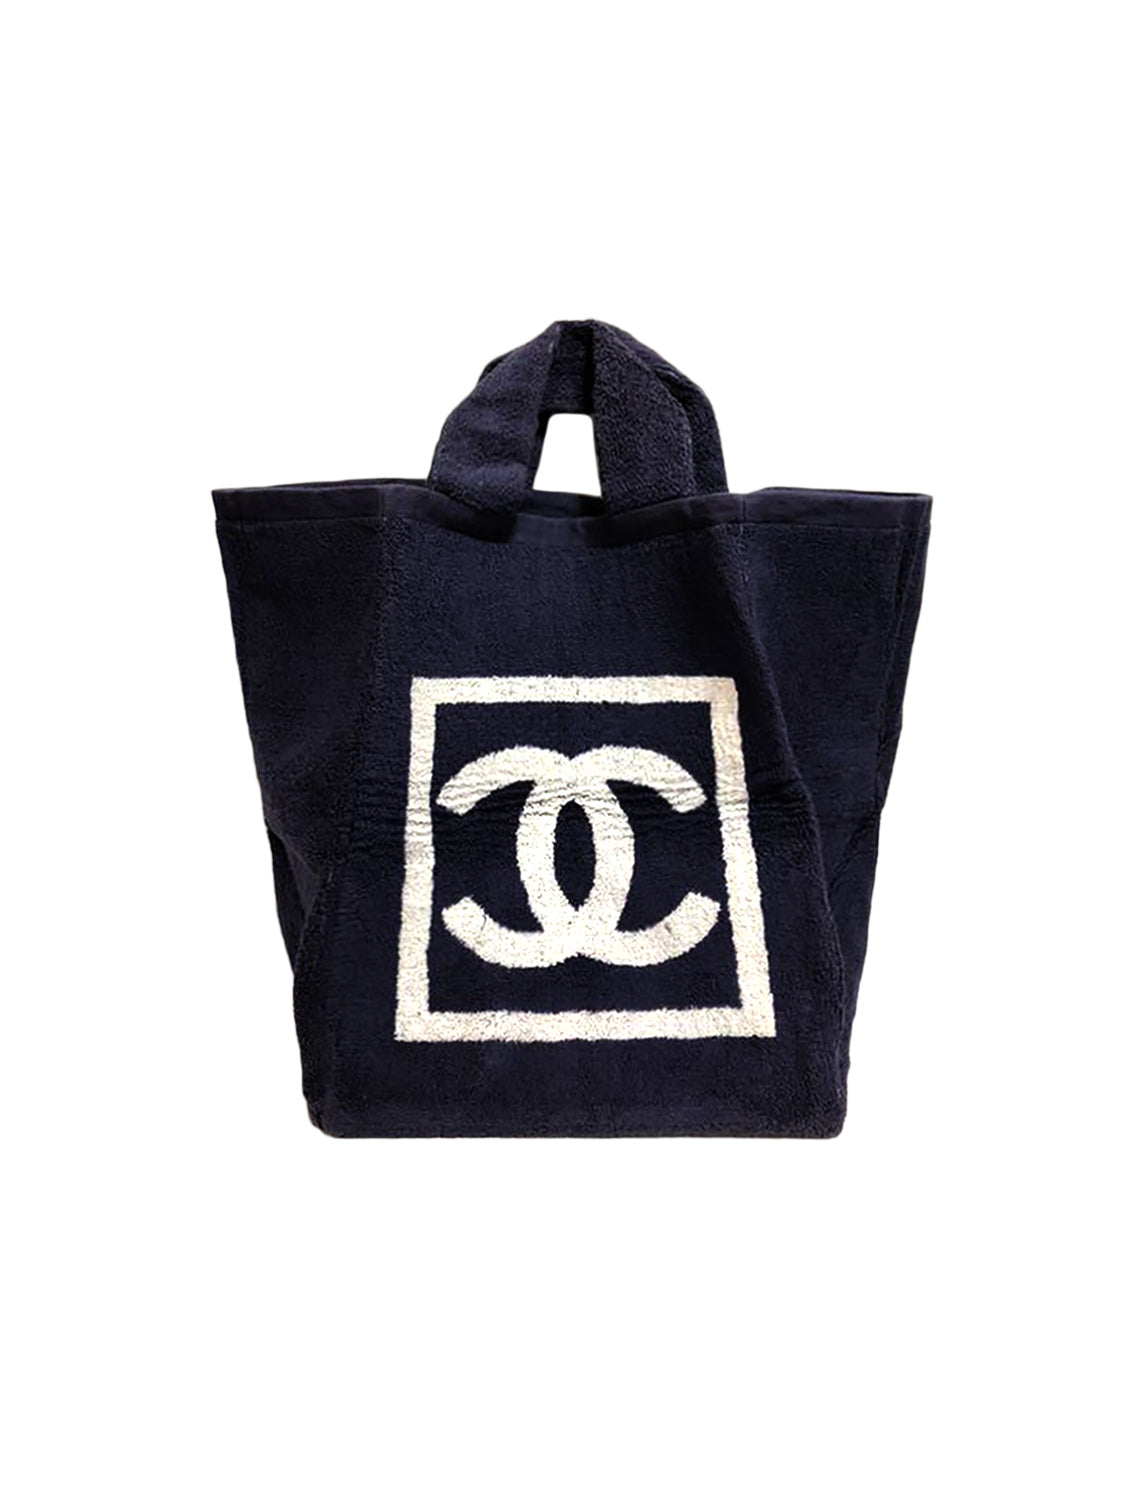 Chanel Terrycloth Navy Tote Bag